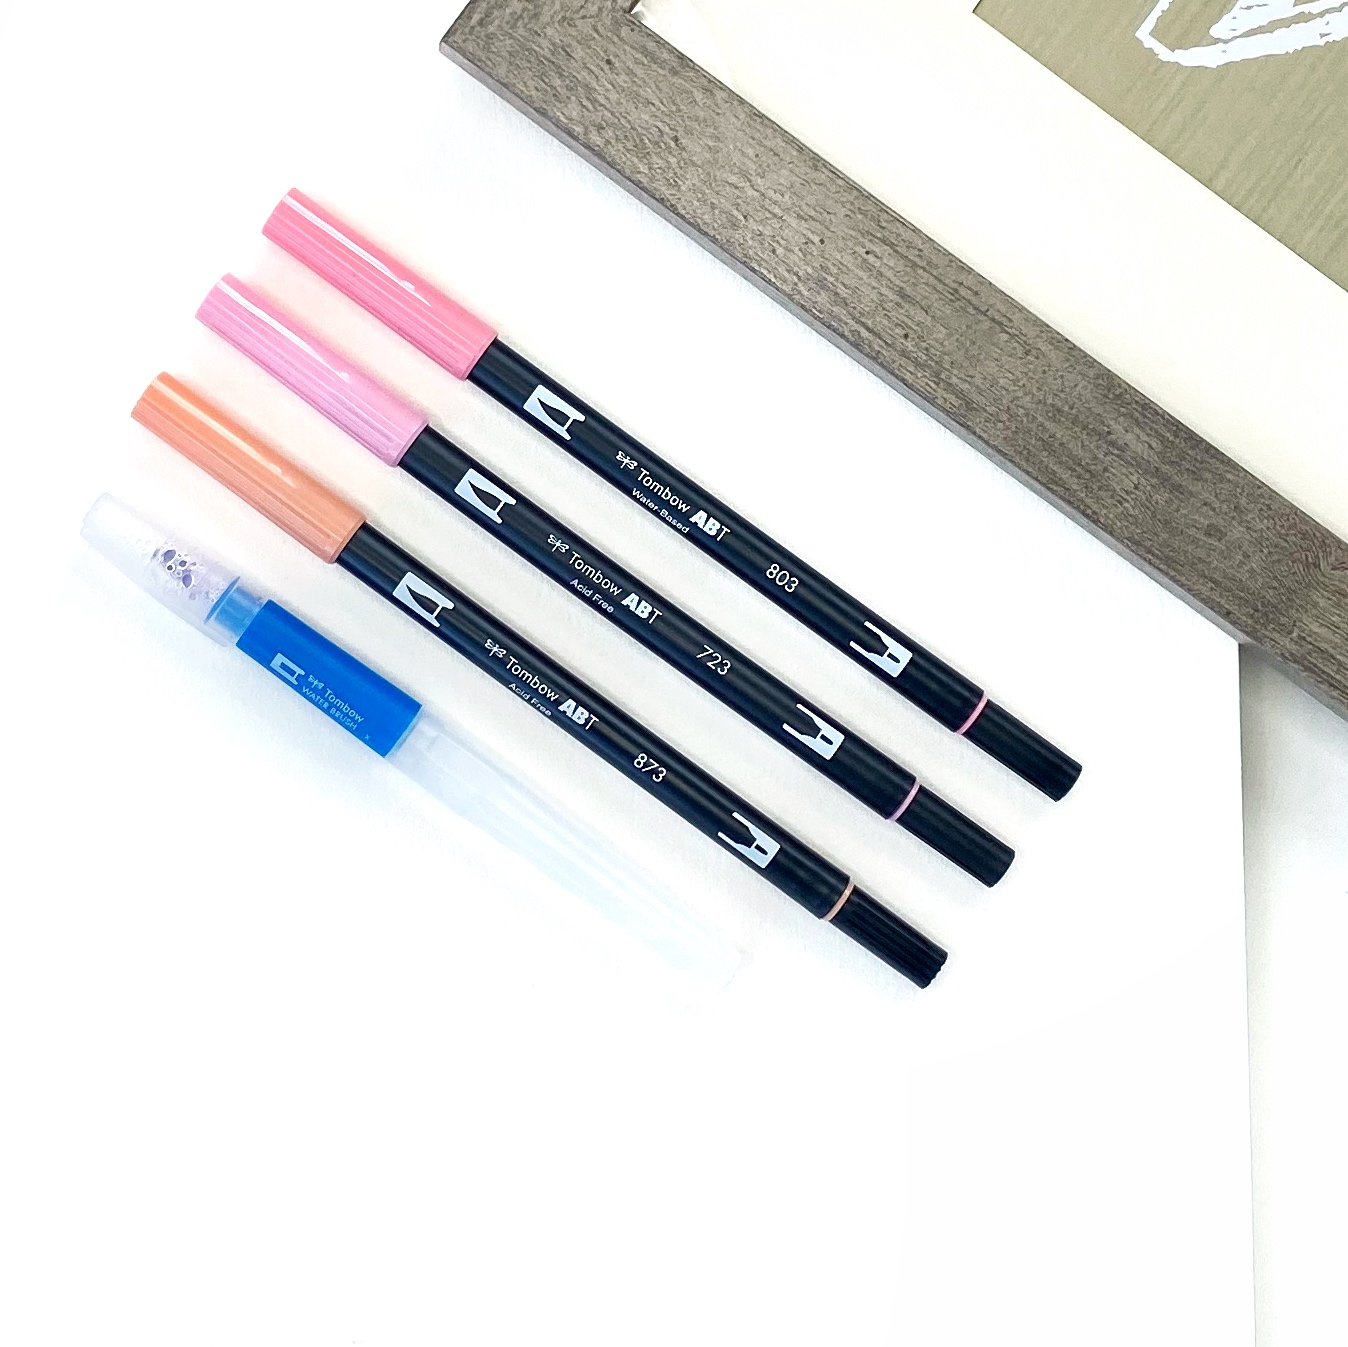 Make Your Own Whiteboard by Jessica Mack on behalf of Tombow